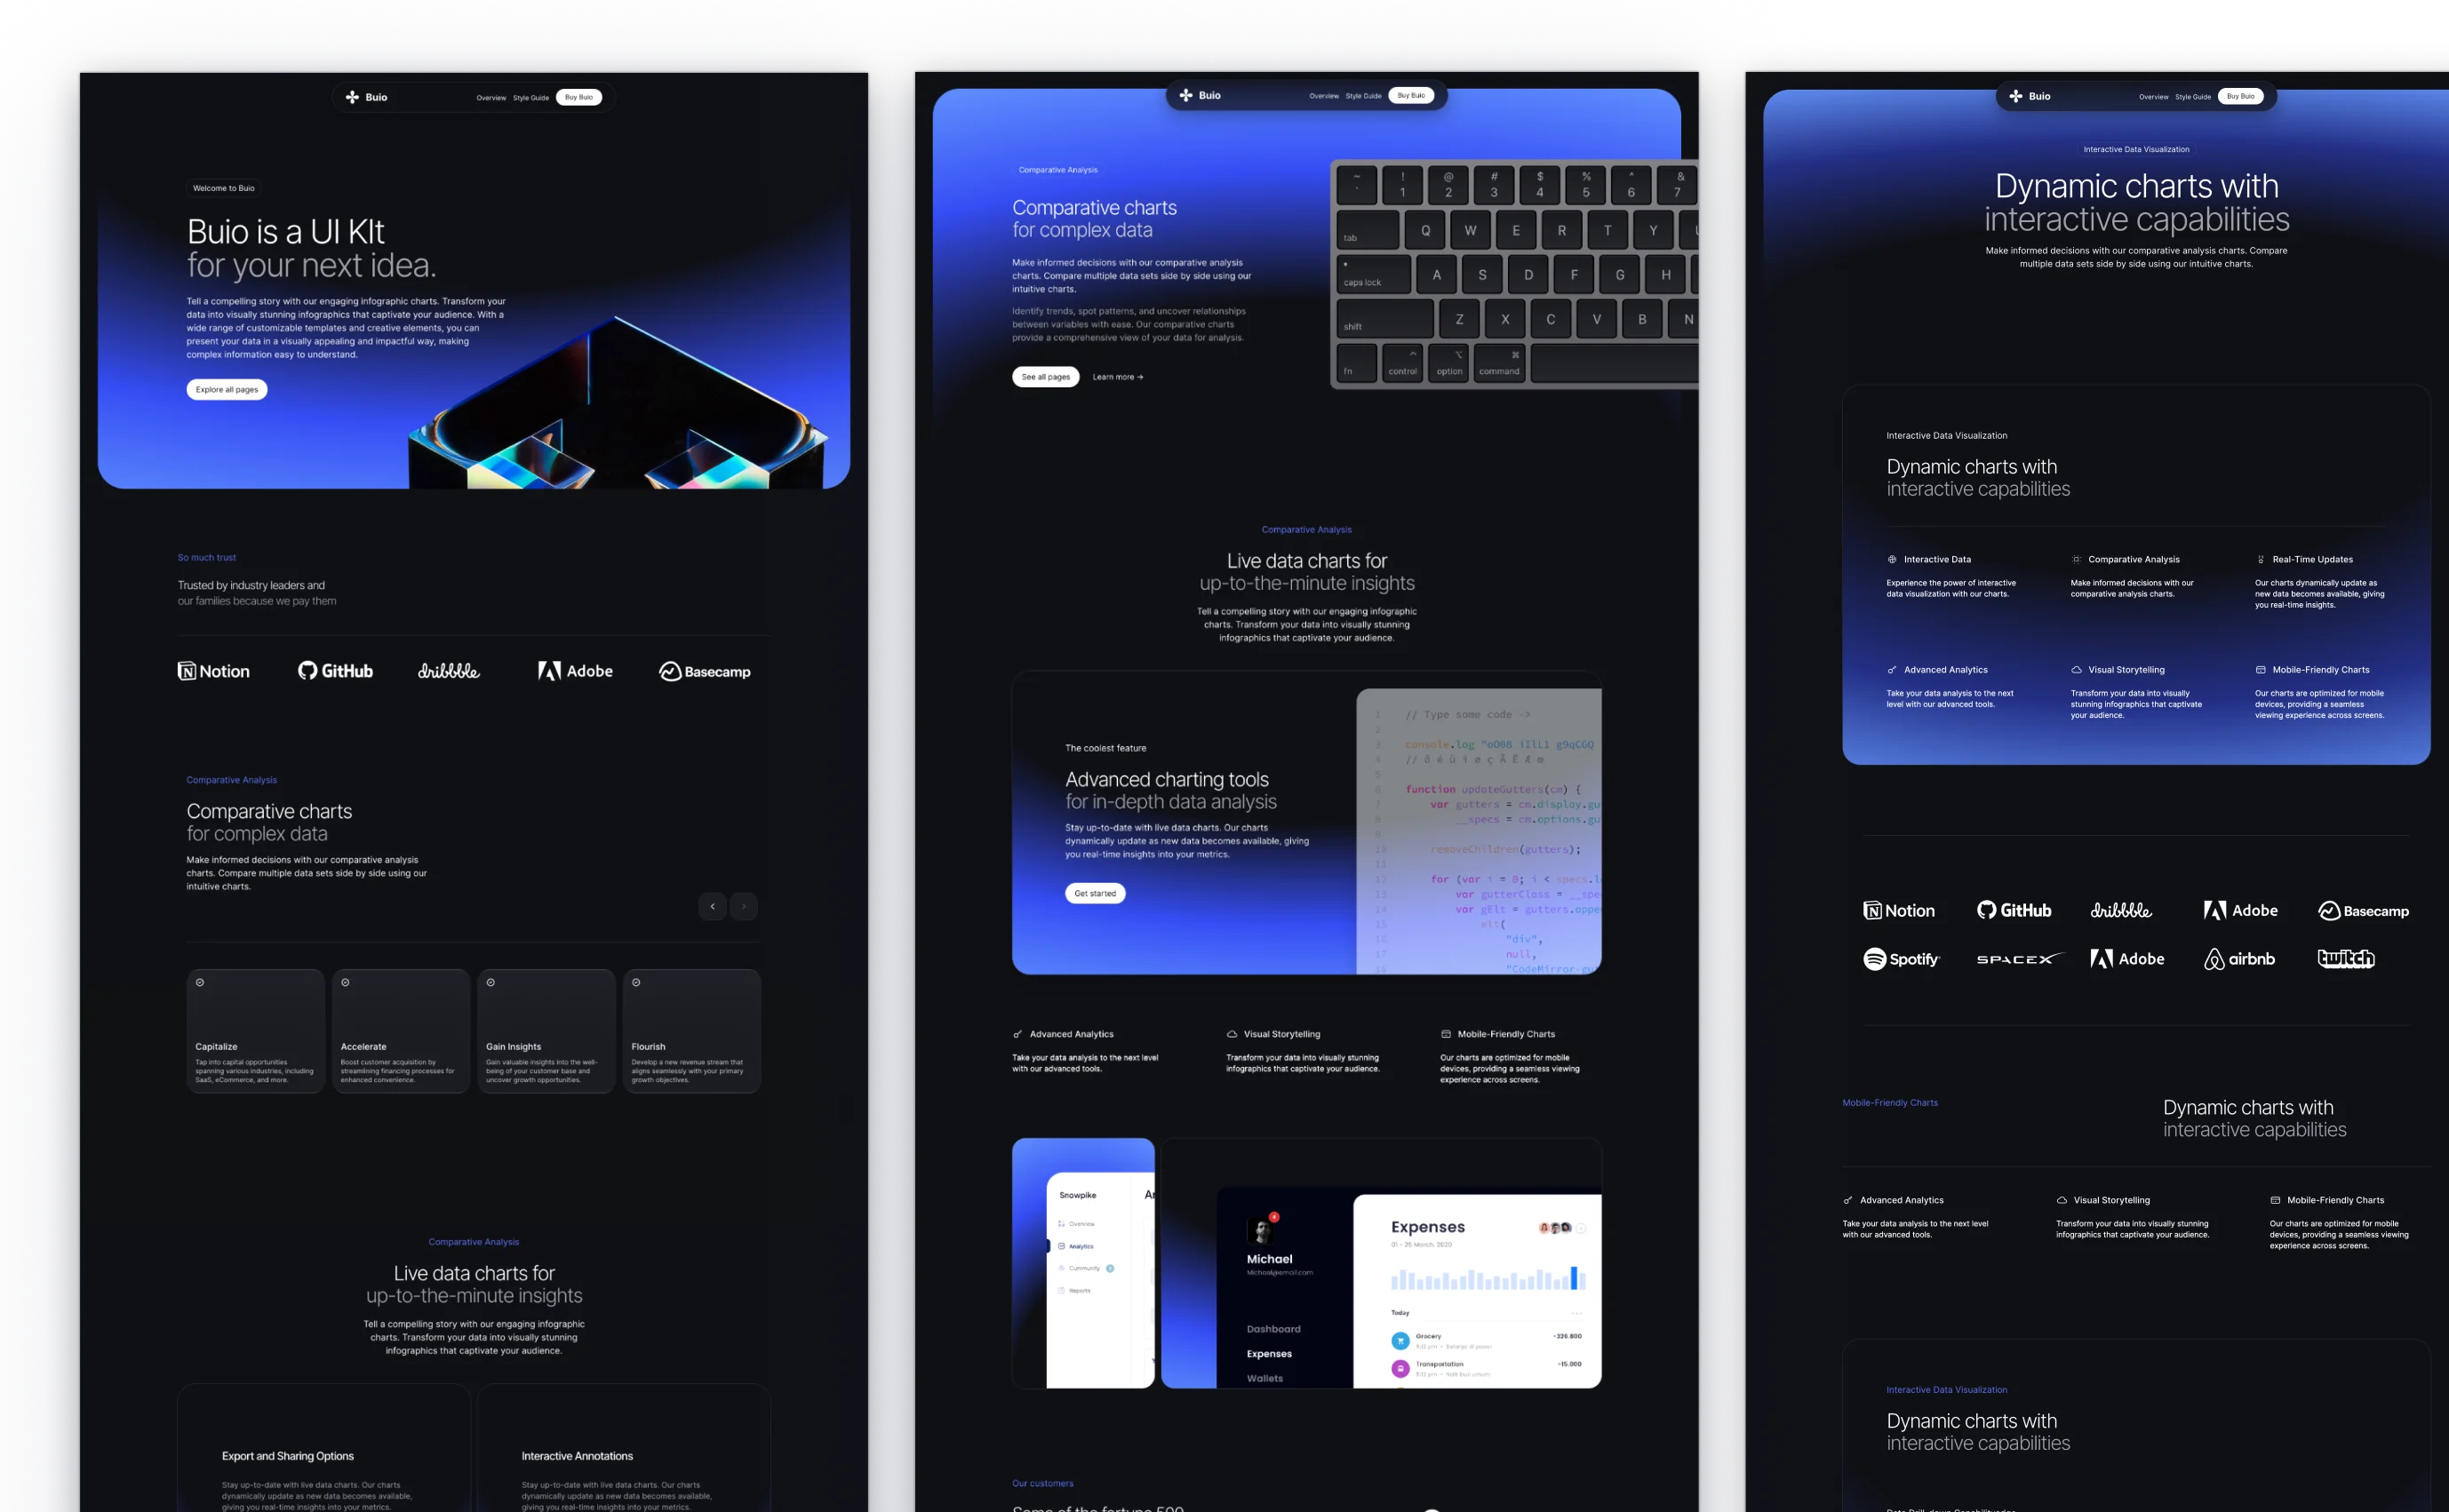 Buio theme display, featuring a sleek dark mode interface with blue accent colors. The theme highlights dynamic, interactive charts, live data insights, and advanced charting tools for data analysis. Logos of trusted companies like Notion, GitHub, and Adobe showcase industry endorsement.